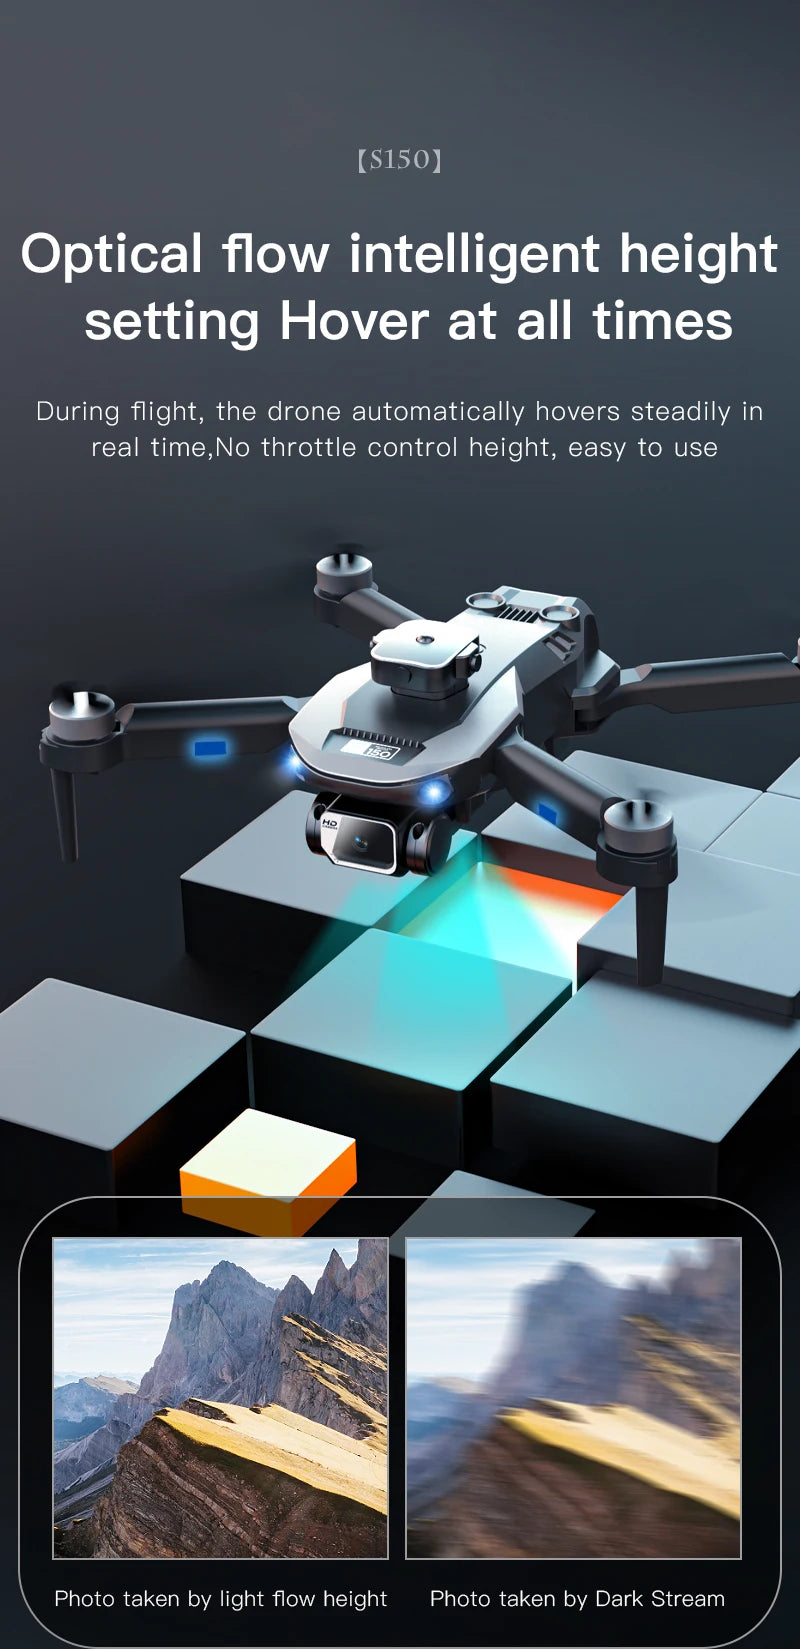 S150 Drone, drone automatically hovers at all times during flight, no throttle control height